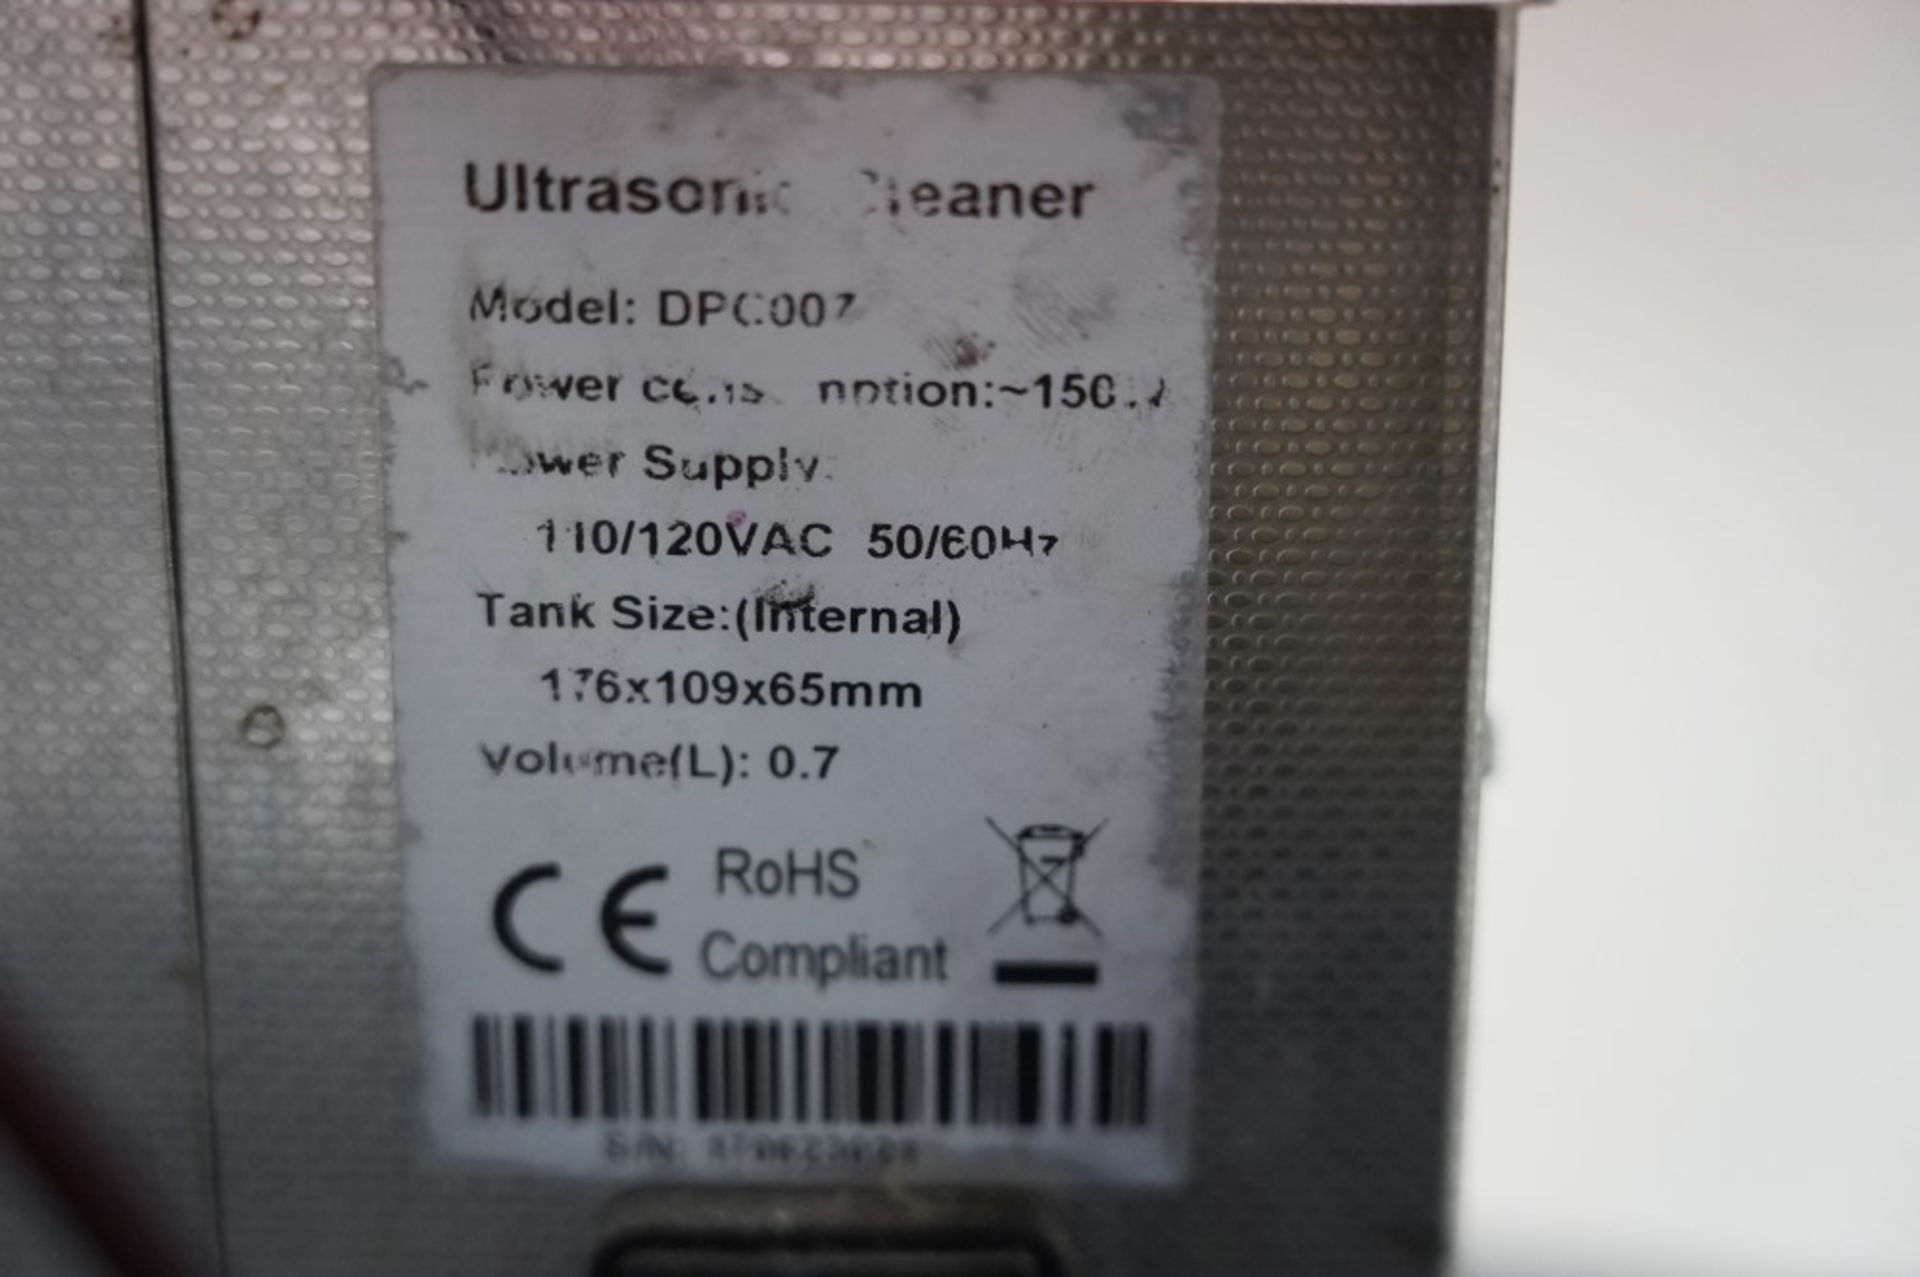 Ultra Sonic Cleaner / Print Head Doctor Model DPC007 / PHD11, Tank Size 176 x 109 x 65 mm, Power Ad - Image 3 of 6